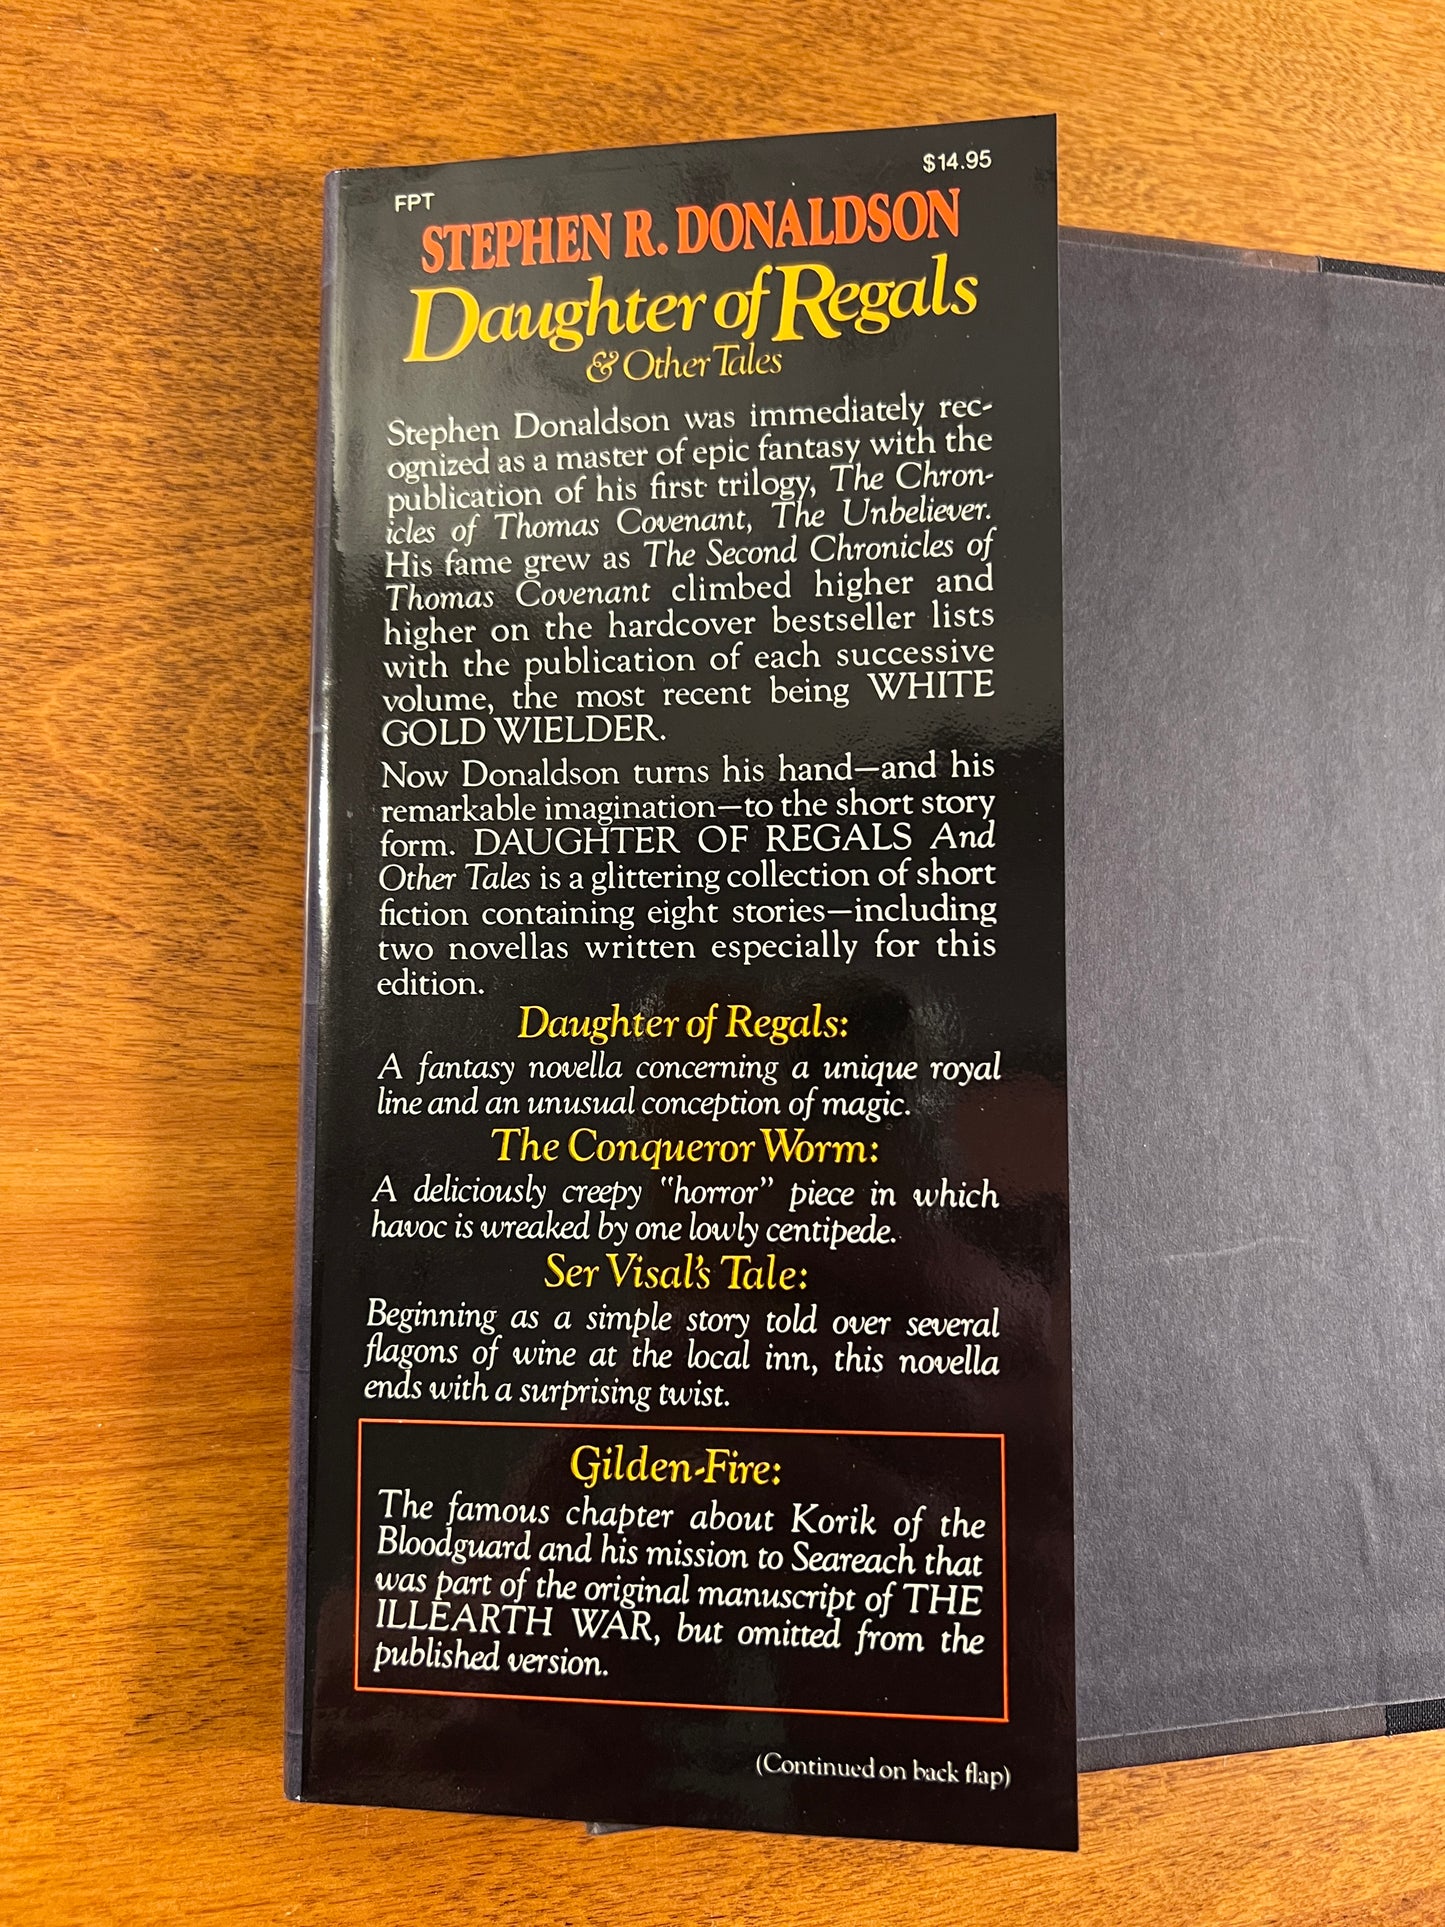 Daughters of Regals & Other Stories by Stephen R. Donaldson